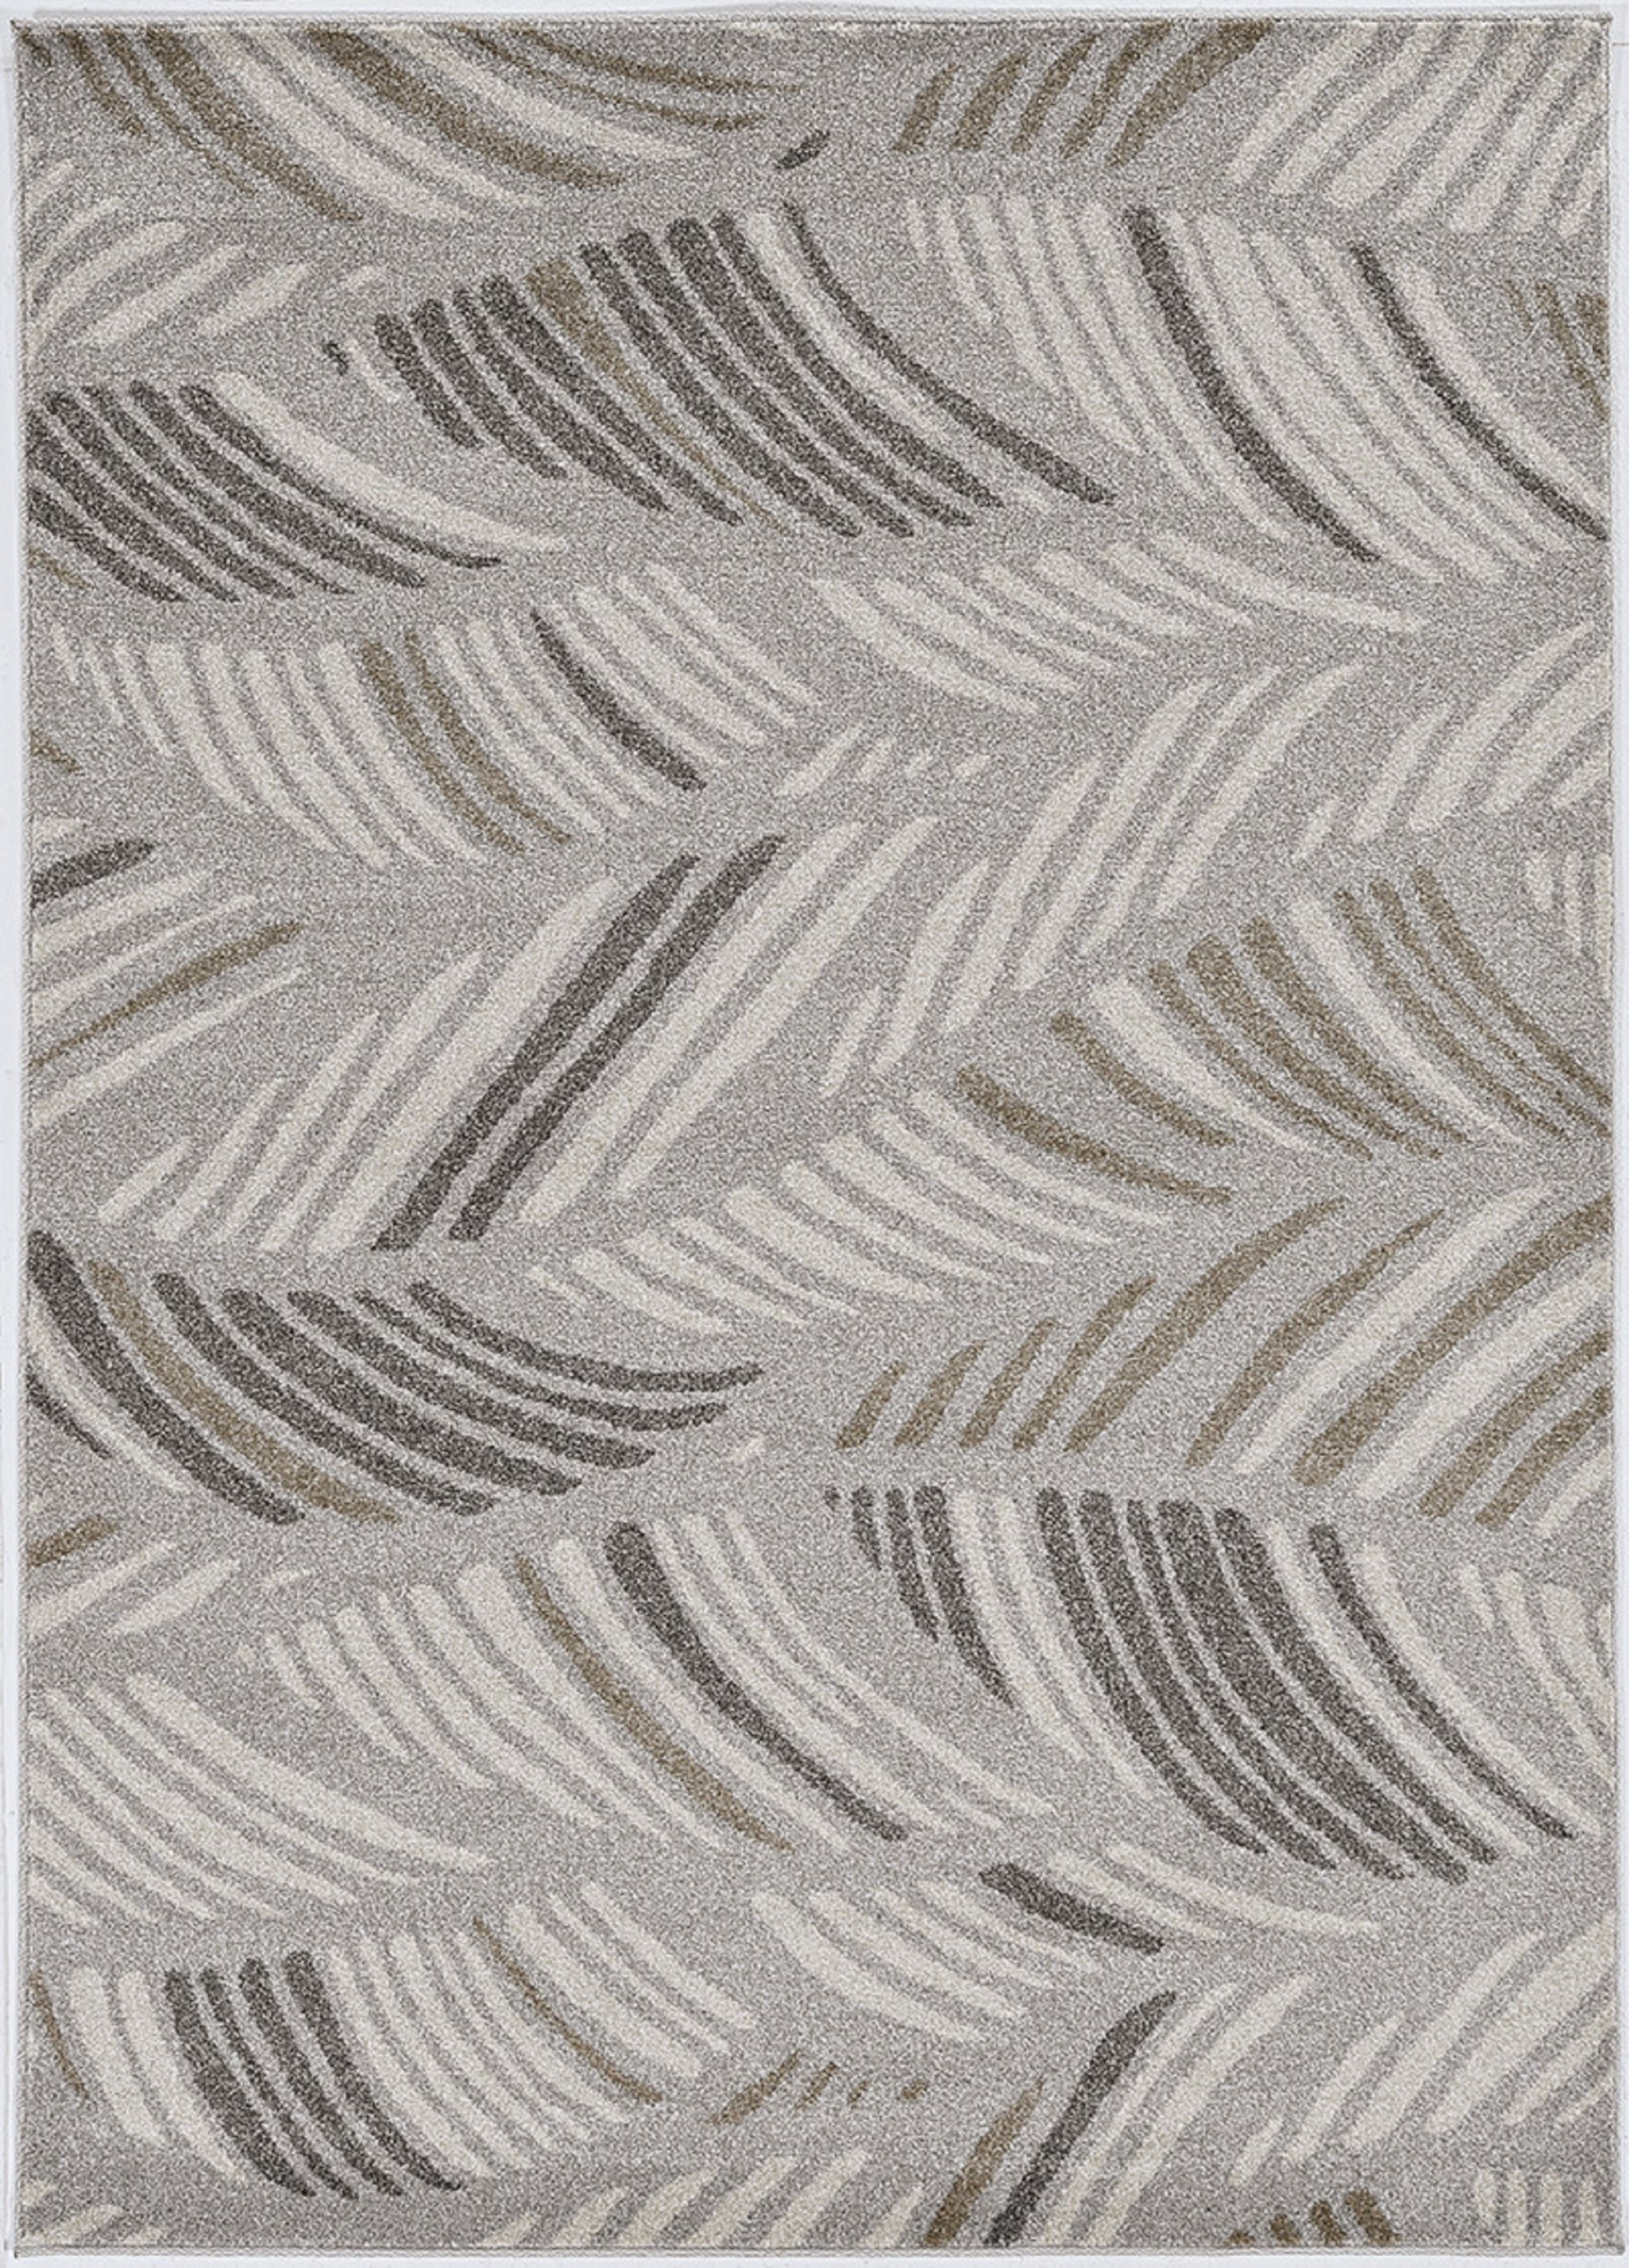 2' X 3' Grey And Beige Waves Accent Rug-375003-1